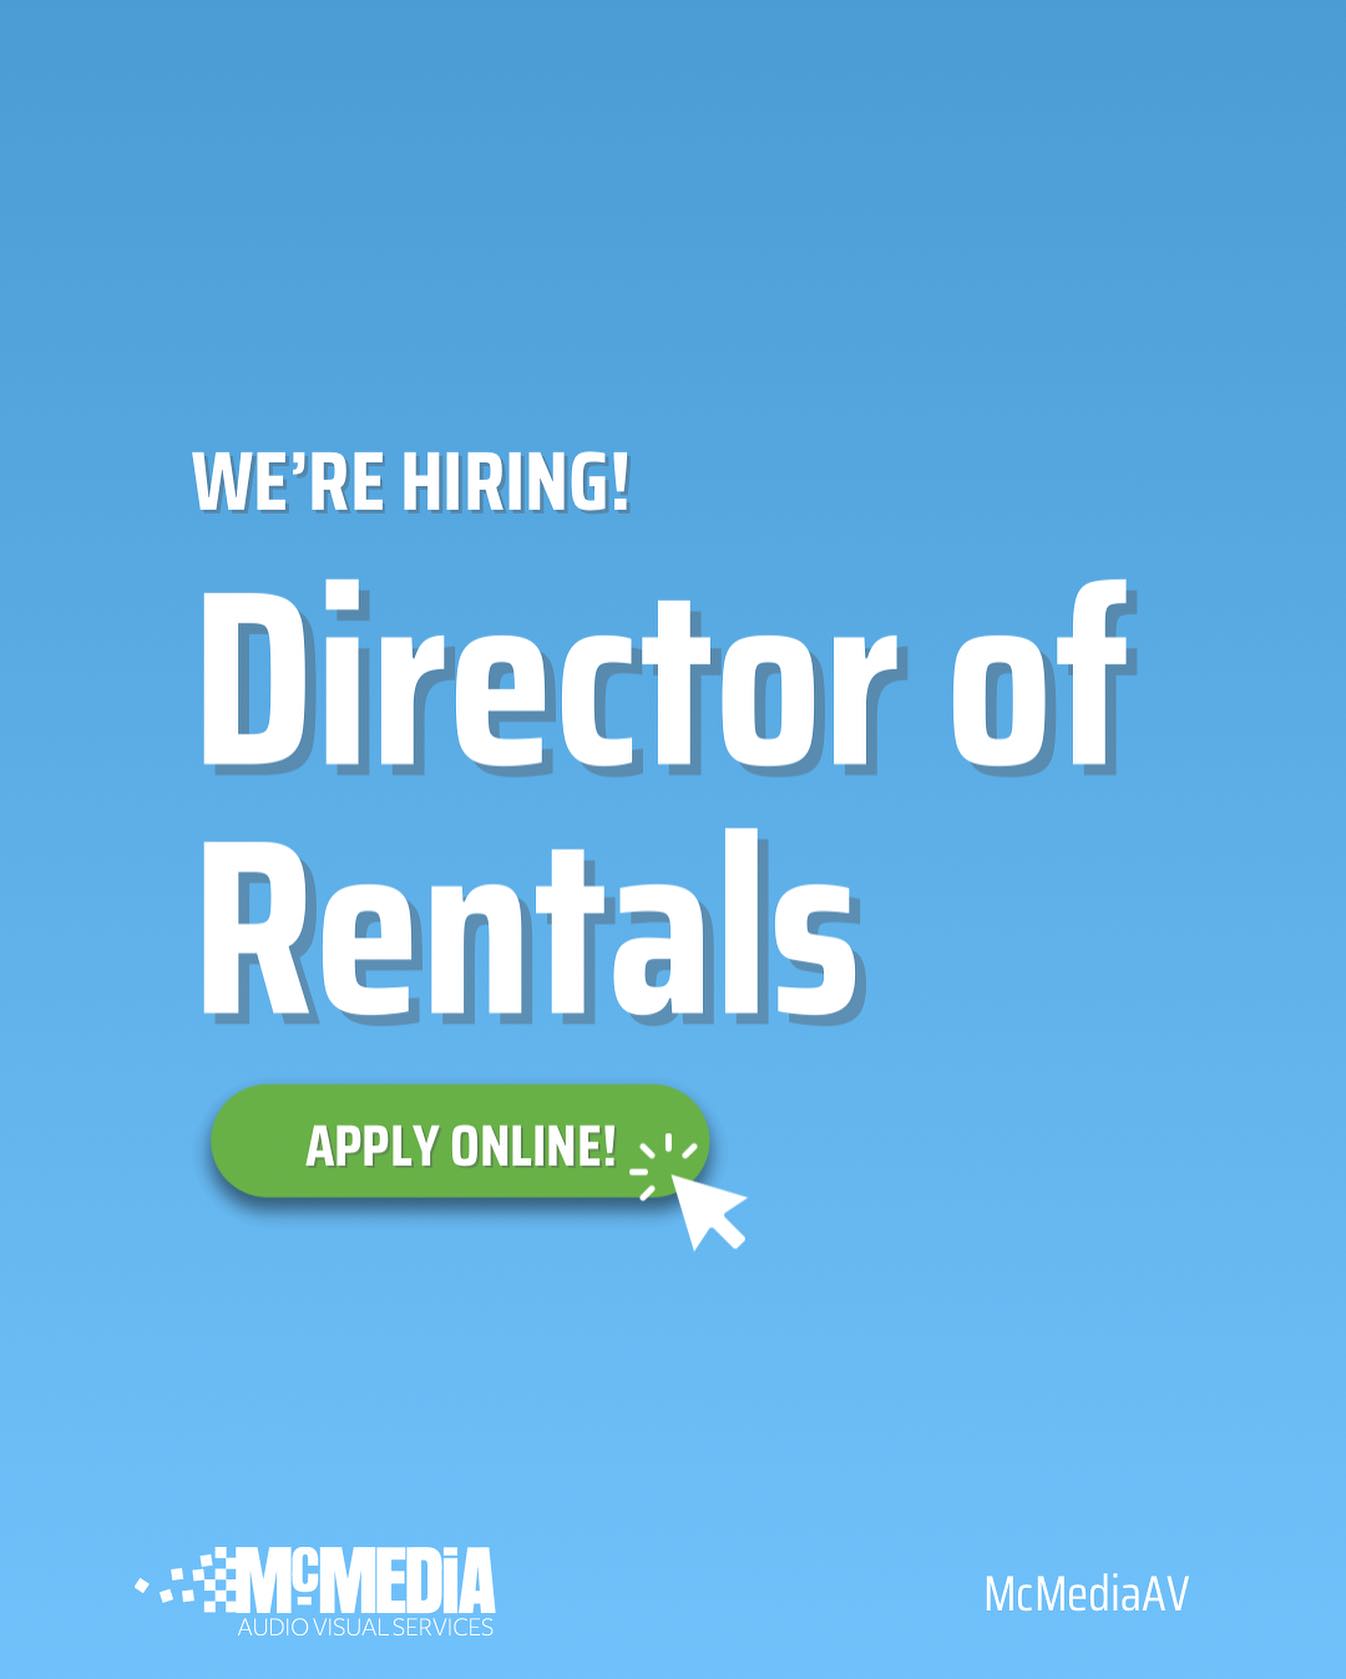 We’re seeking a dynamic Director of Rentals to spearhead our Rentals Department! If you have an extensive background in audio-visual, a passion for technology, and a drive to lead - we want to hear from you! About the Role: 🔹 Shape the strategic vision of the Rentals Department. 🔹 Lead & nurture our vibrant team.…